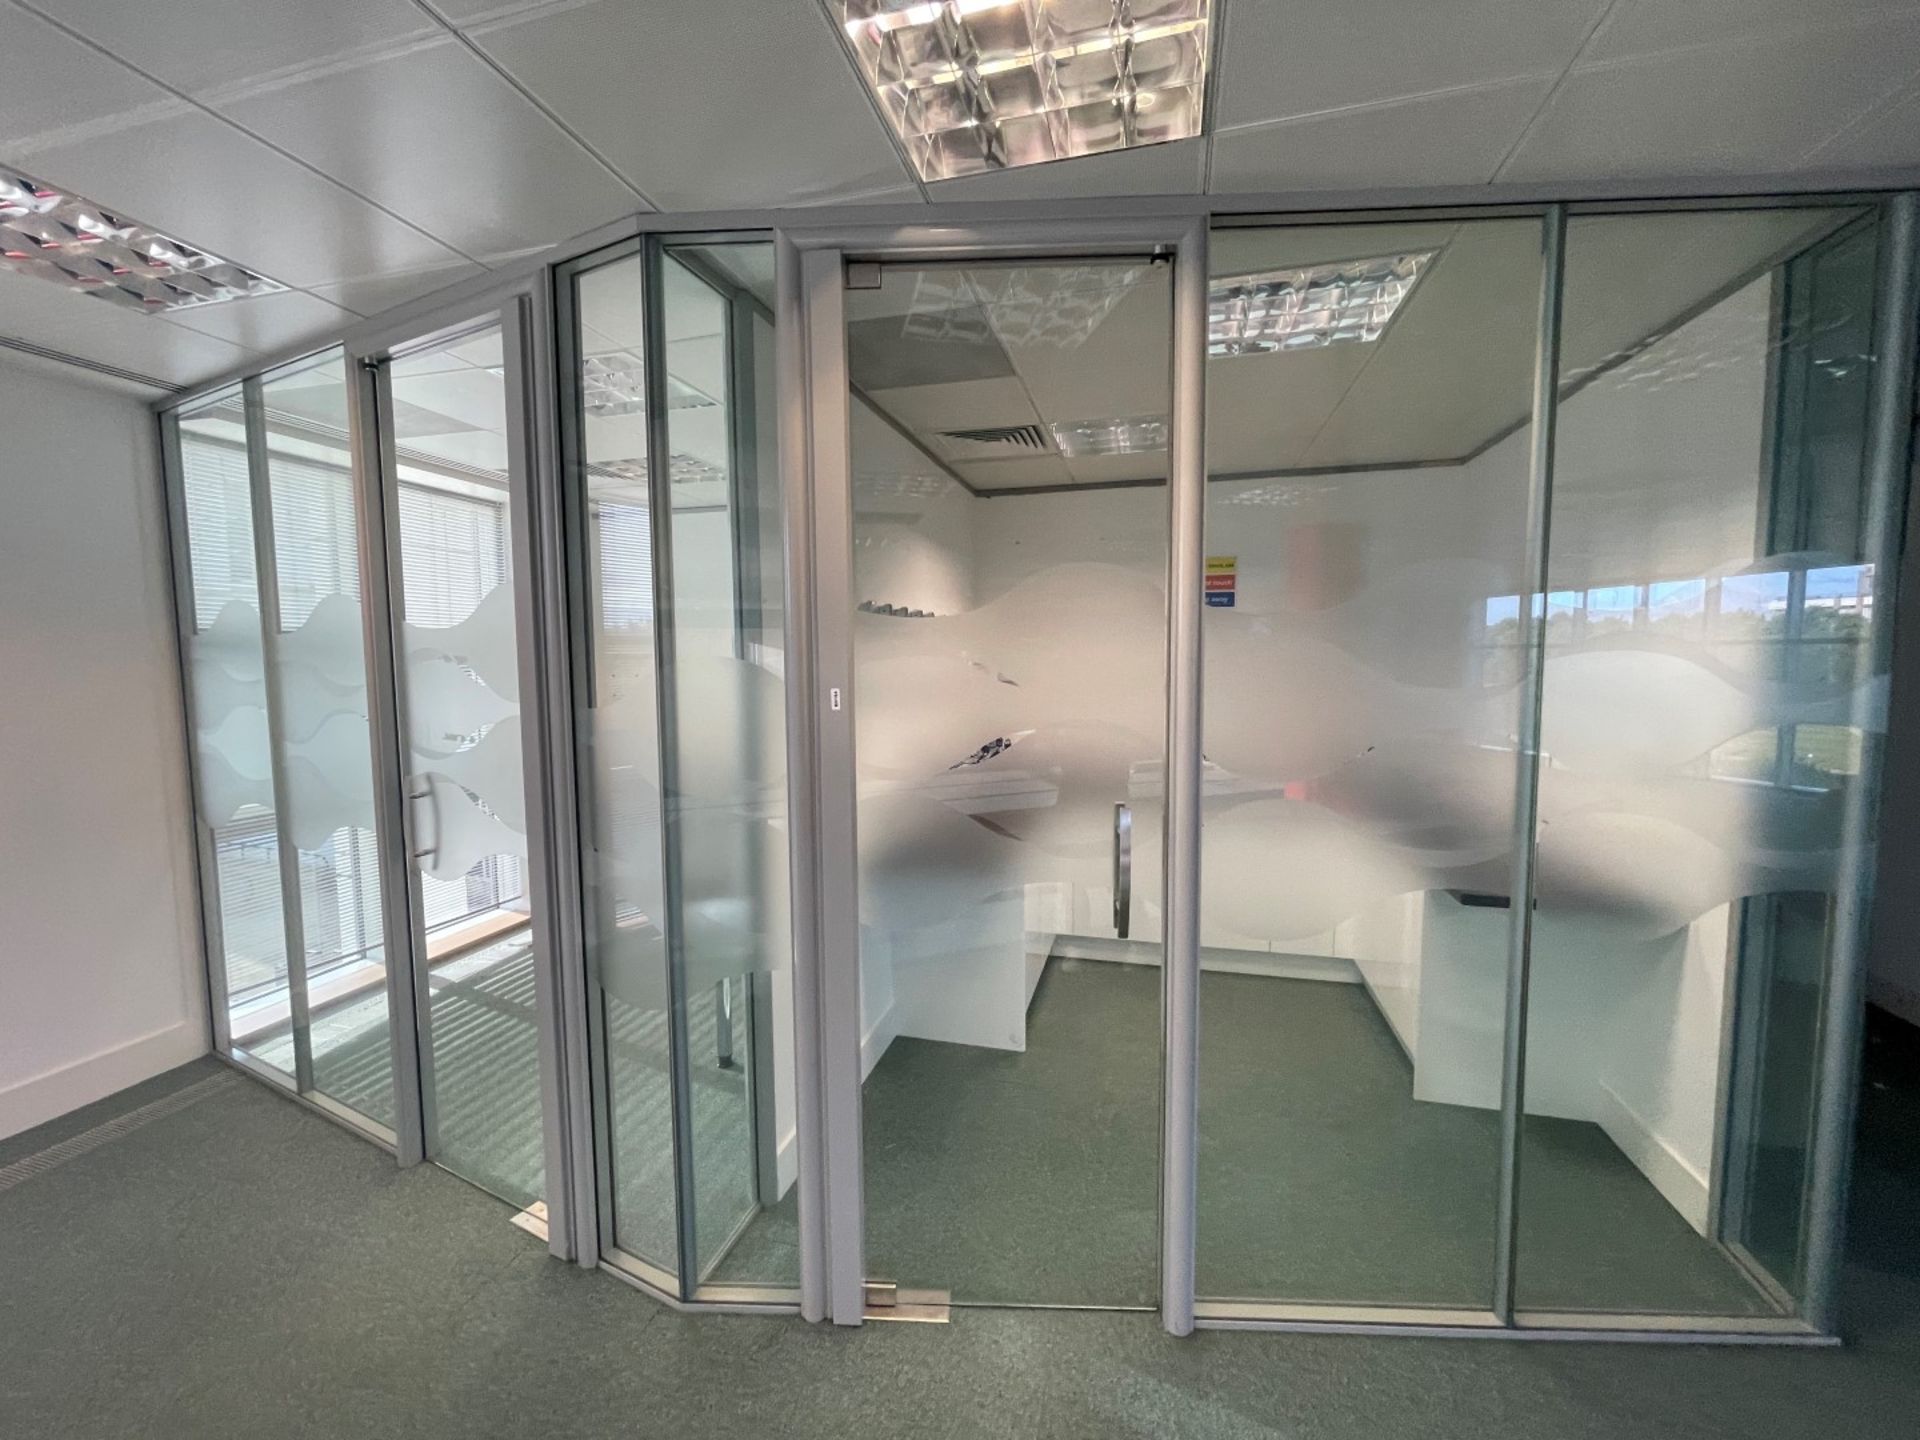 9 x Assorted Glass Office Dividers Panels With 2 x Glass Doors - Currently Covering 2 Offices